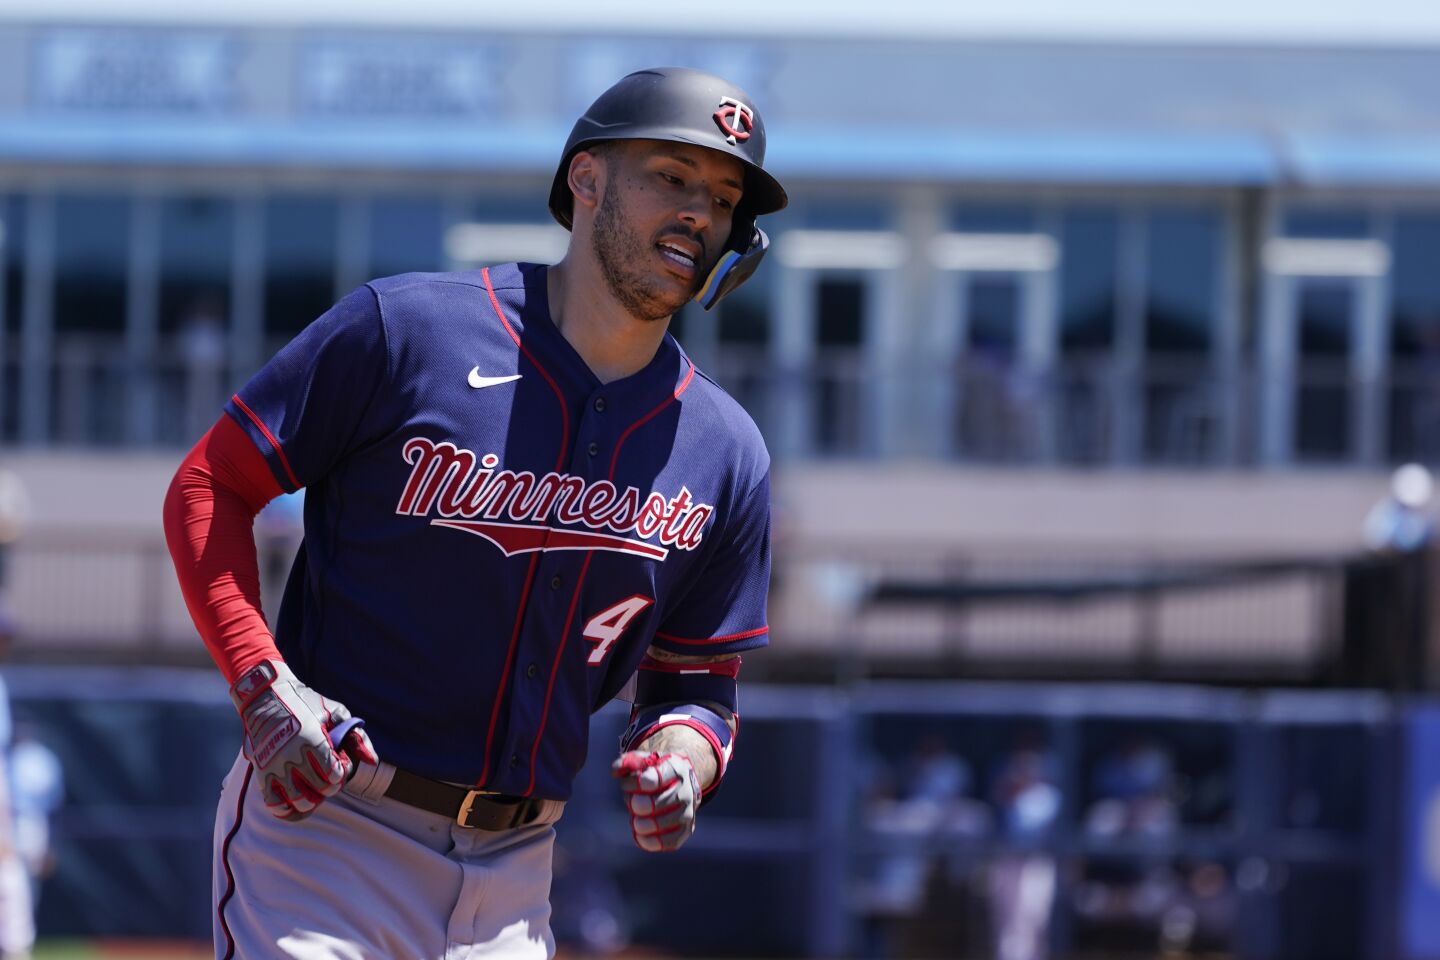 15 | Minnesota Twins (73-89, 5th in AL Central)This isn’t exactly a meet-cute: Carlos Correa will make $35.1 million in each of the next three seasons … provided he doesn’t opt out after his first or second season in Minnesota.